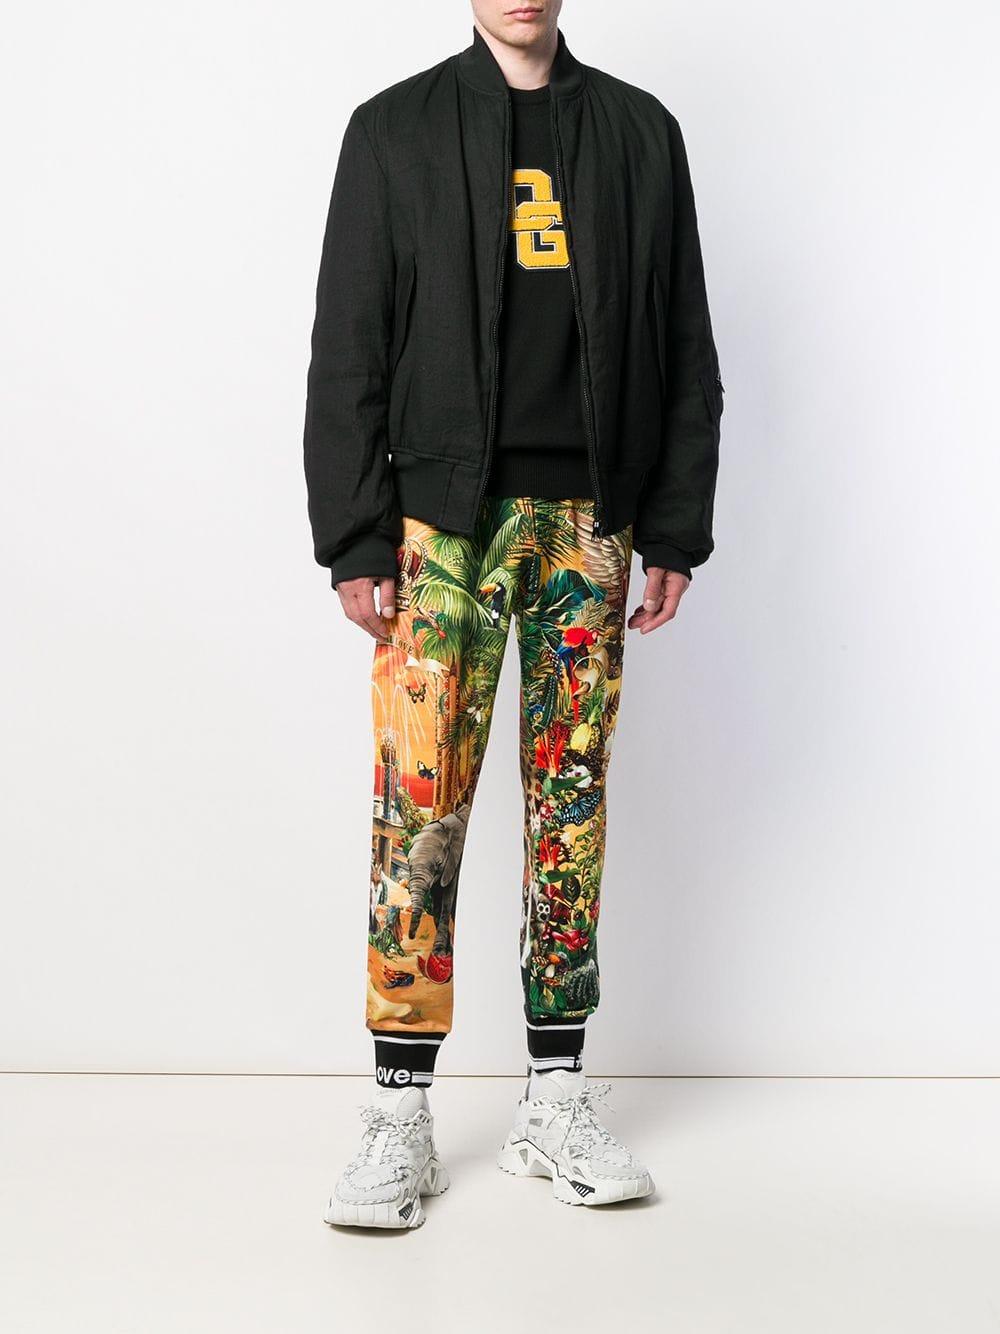 Dolce & Gabbana Printed Track Pants for Men - Lyst